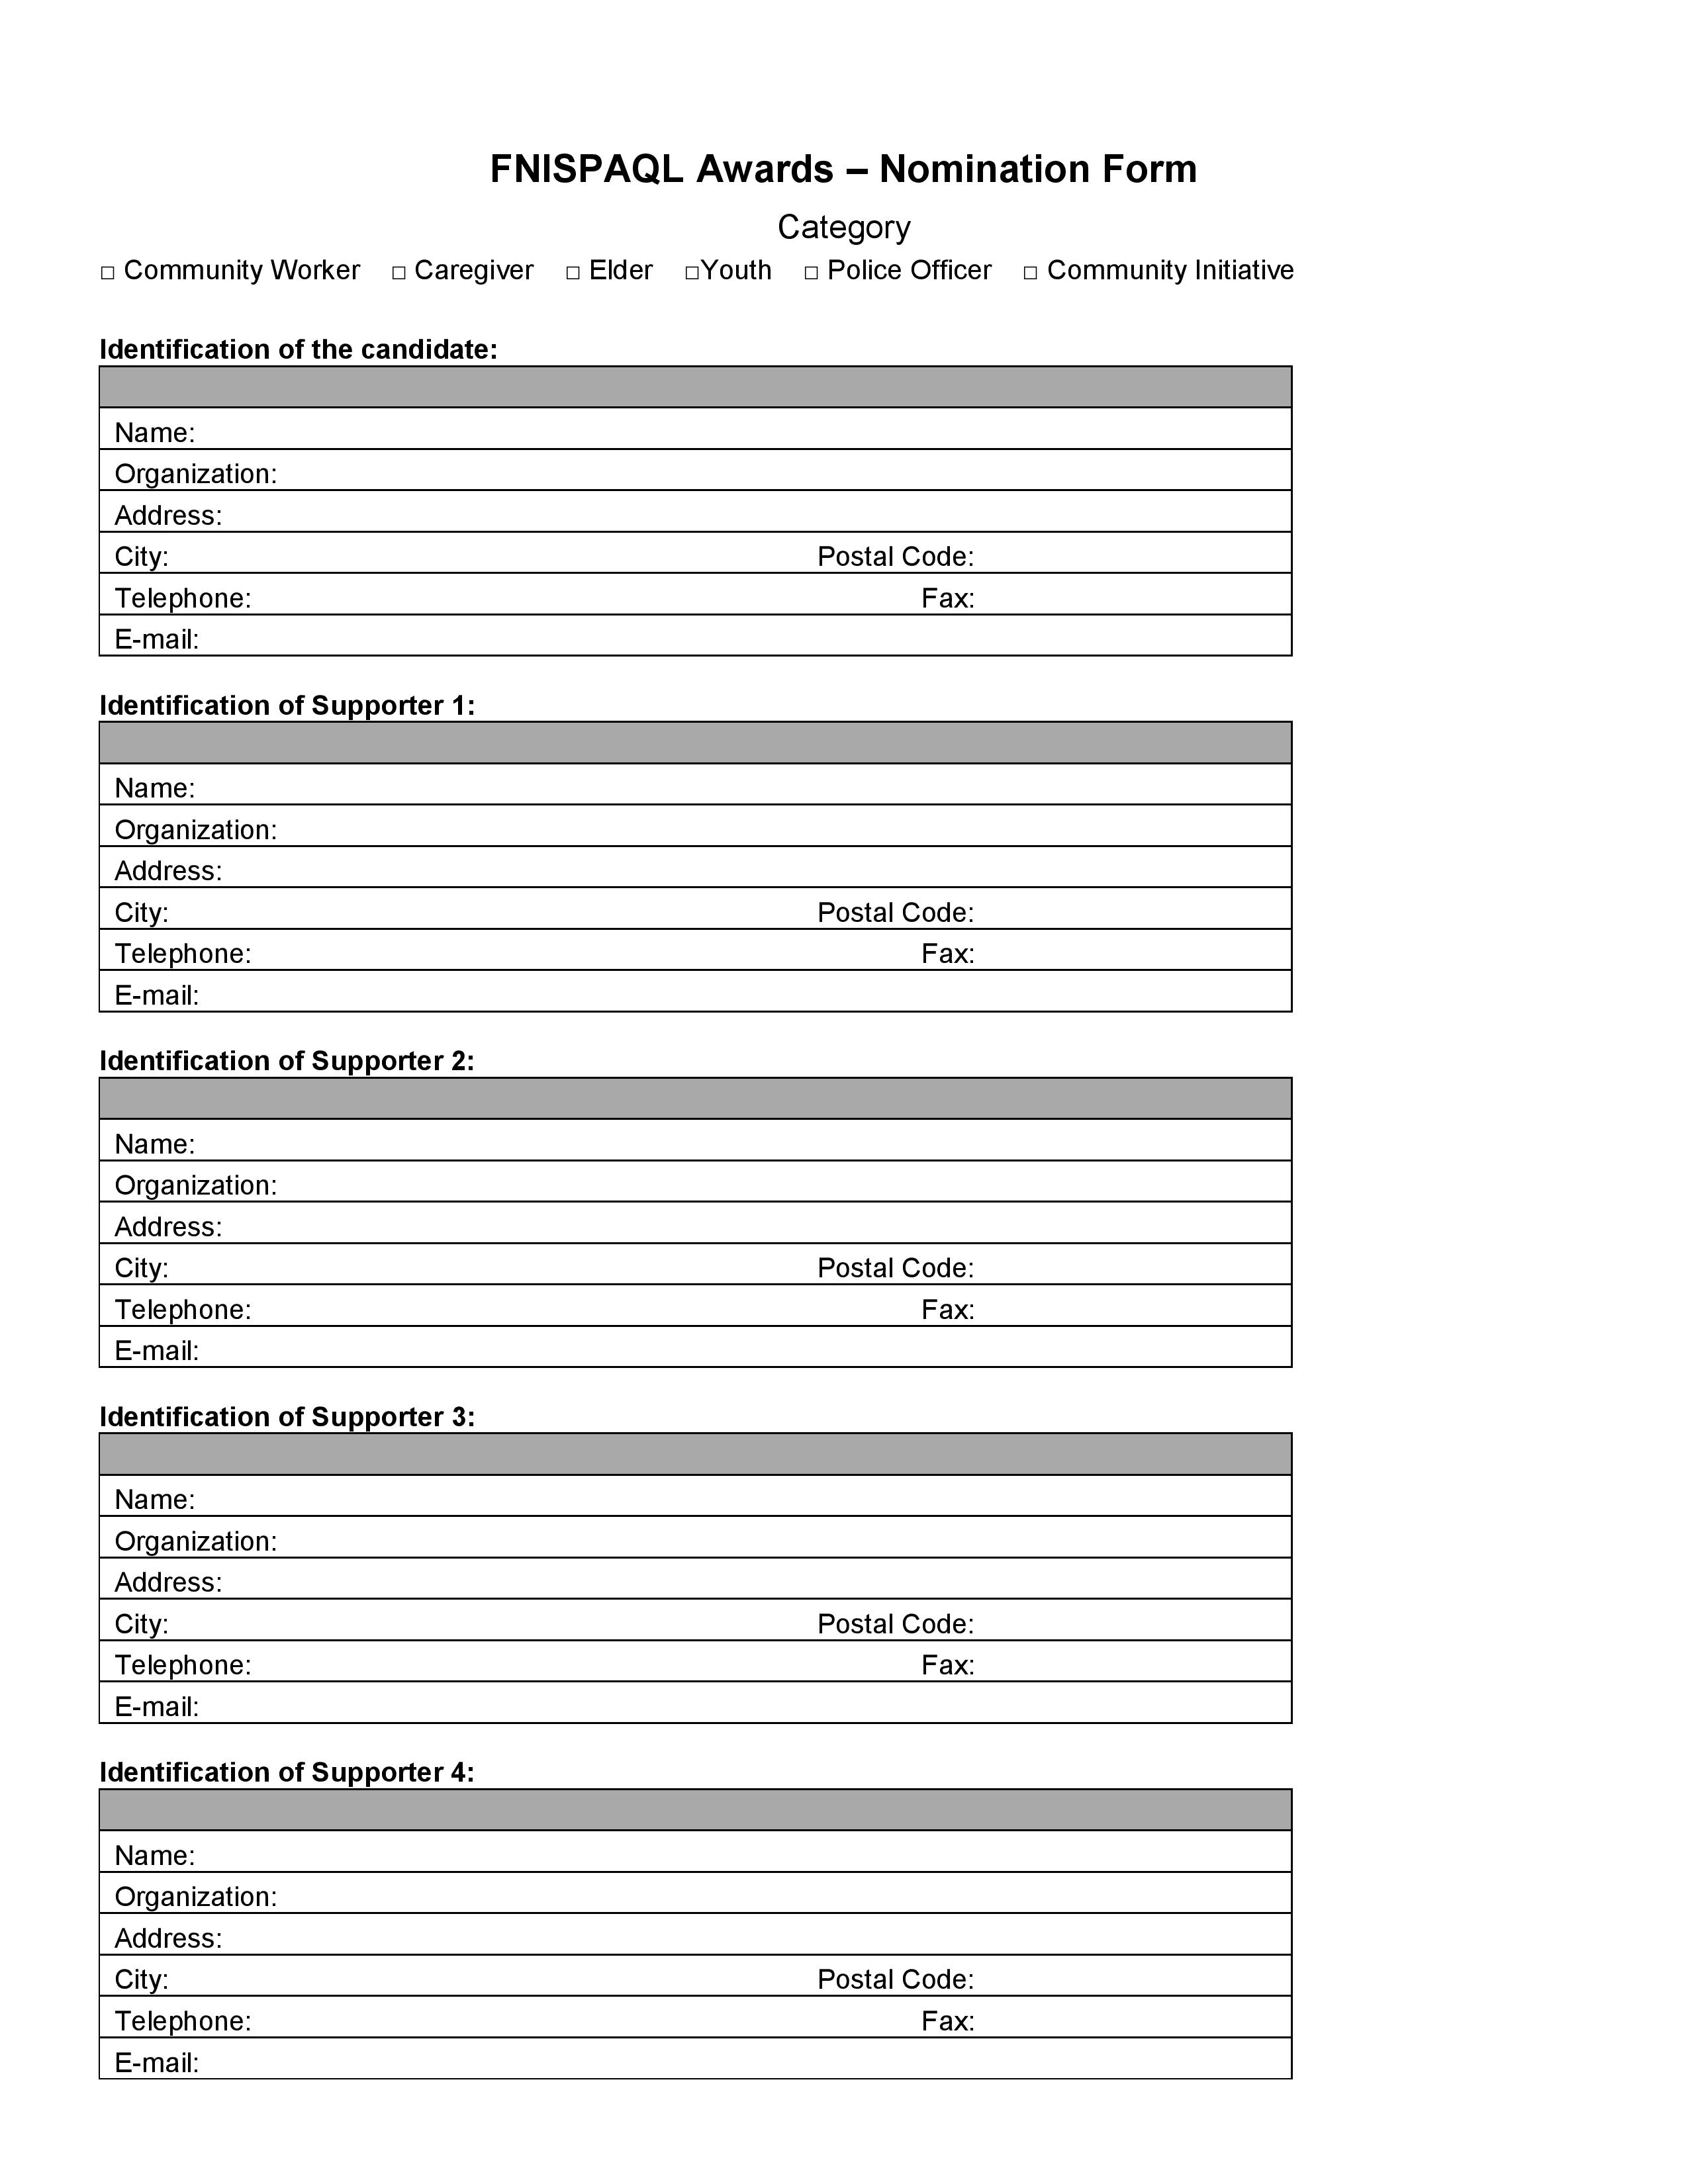 Awards 2015 form page 2